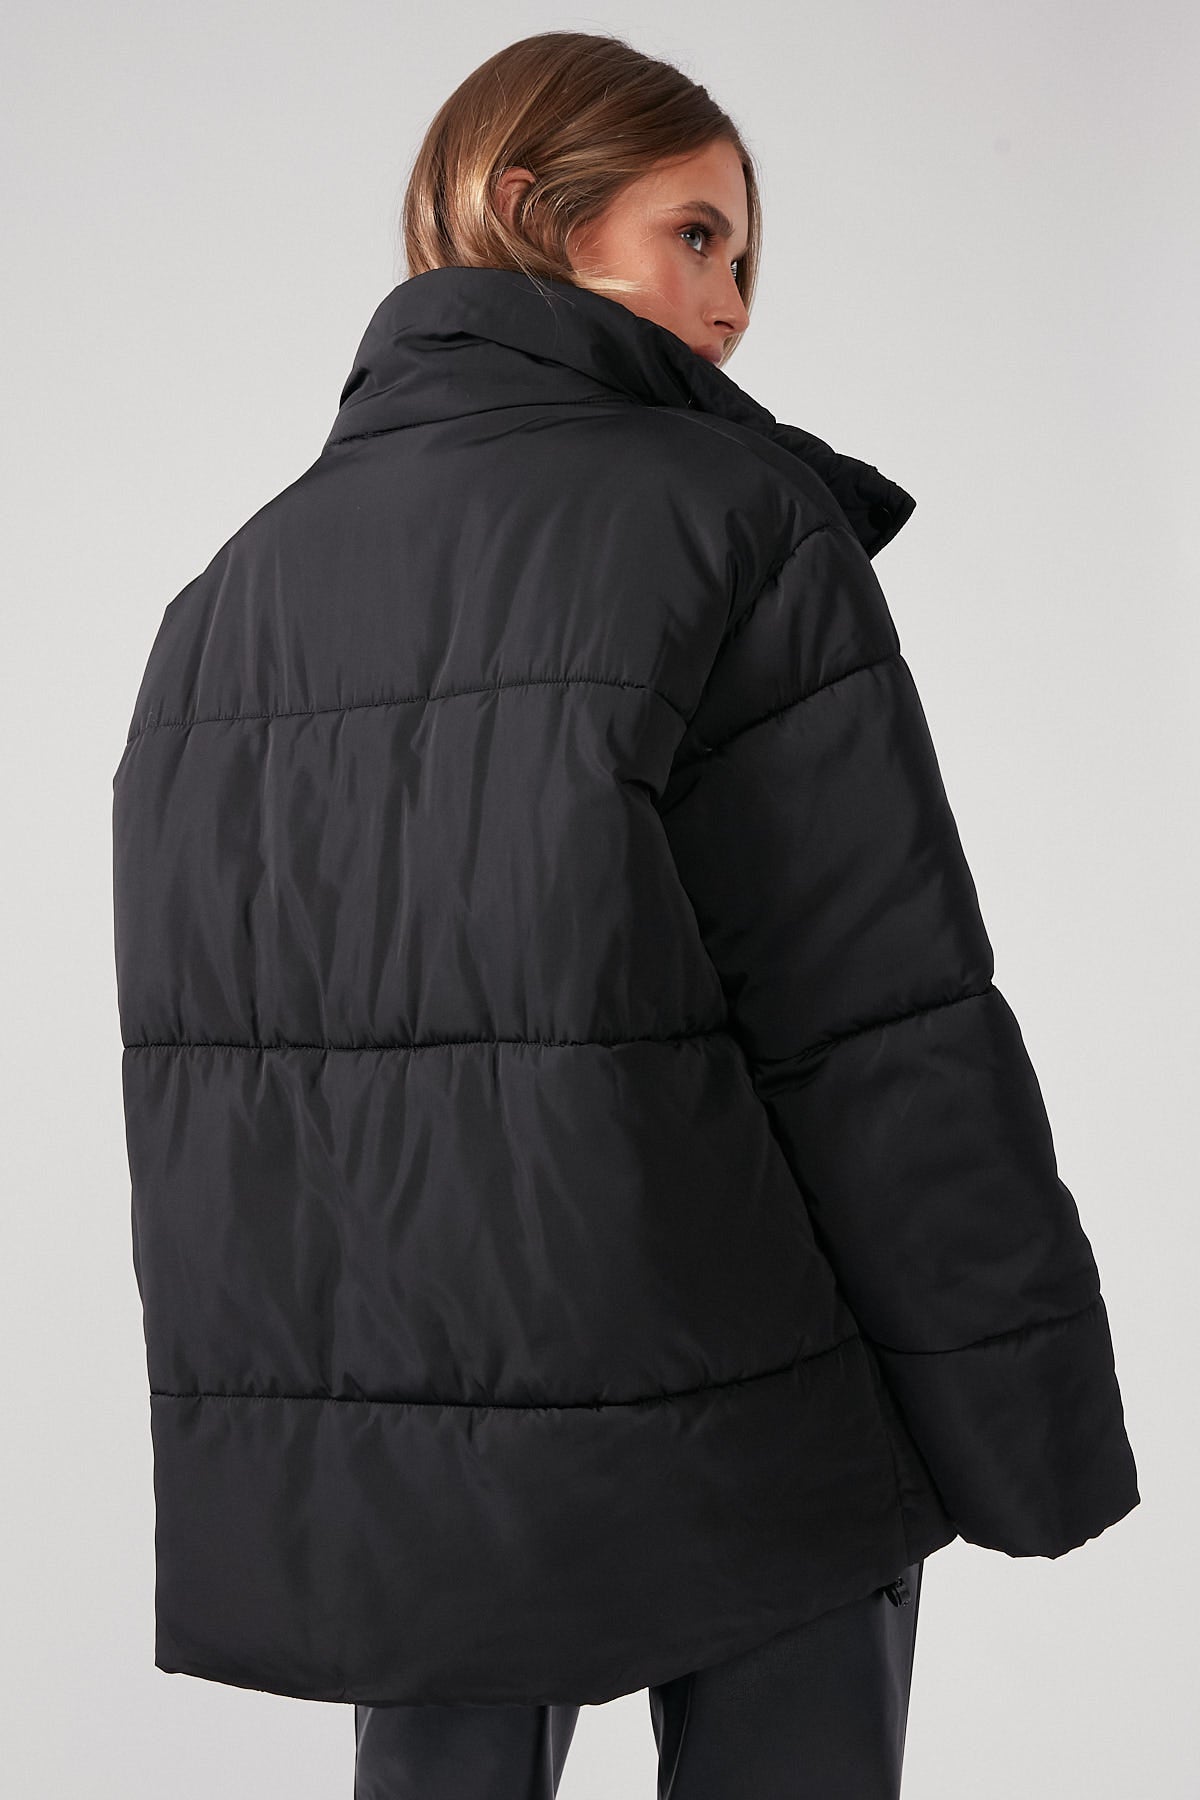 Perfect Stranger Chaser Recycled Puffer Jacket Black